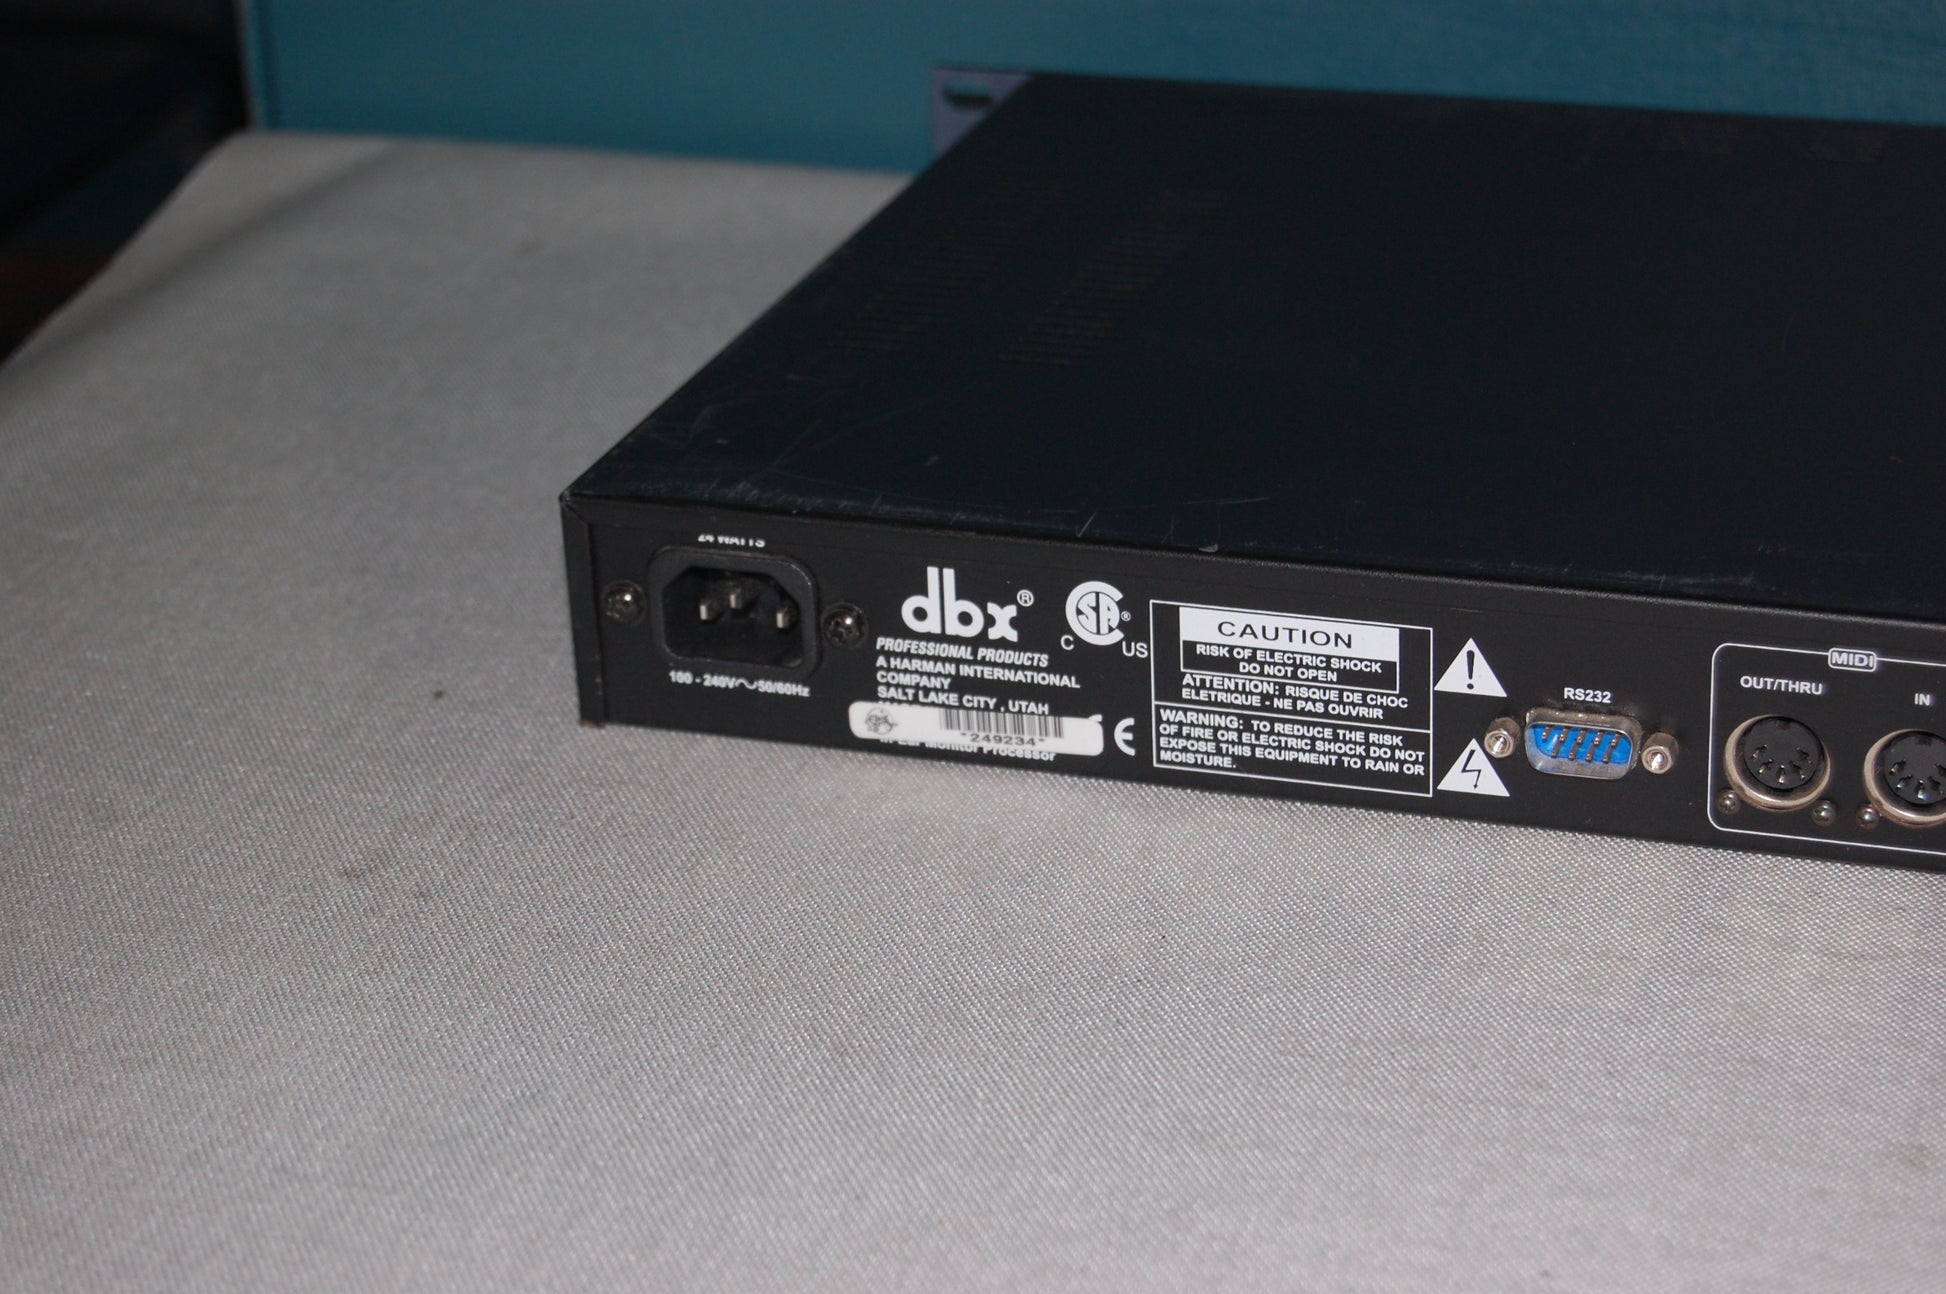 Used dbx IEM (In-Ear-Monitor) Processor for Sale. We Sell Professional Audio Equipment. Audio Systems, Amplifiers, Consoles, Mixers, Electronics, Entertainment, Sound, Live.